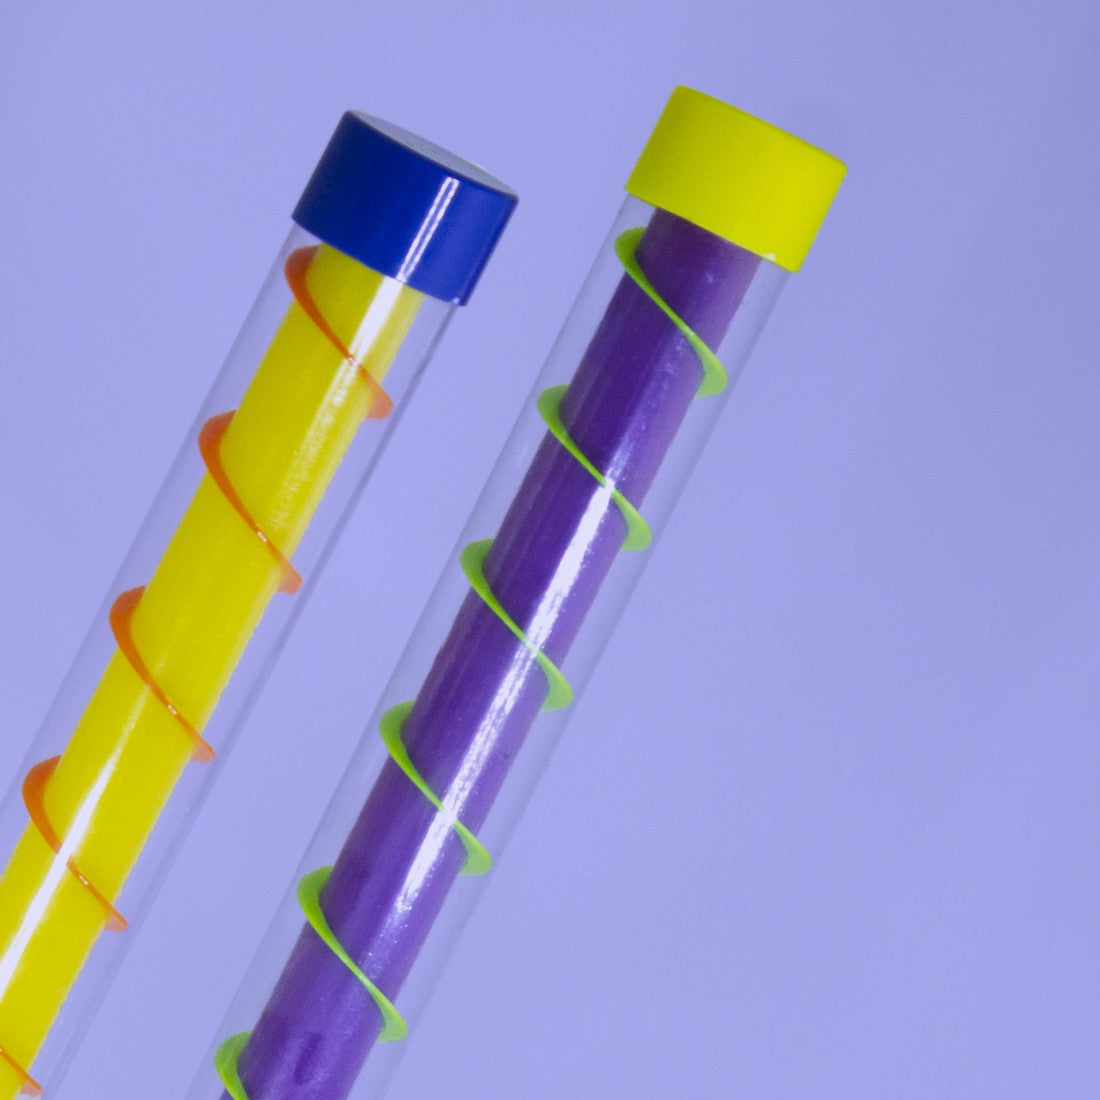 Spiral UV Groan Tube, Our lovely Spiral UV Groan Tubes are a colourful and eye catching fun noise making fun novelty toy. Each Spiral UV Groan Tube is bright and colourful and when turned make a relaxing sound as the pieces fall down the tube. Simply turn the Spiral Groan Tube upside down or give it a shake and listen as the delightful Spiral Groan Tube makes a relaxing sound.The Spiral Groan Tube is helpful for the following skills: Hand and eye co-ordination Gripping Skills Hand Grip and hand muscle exerc